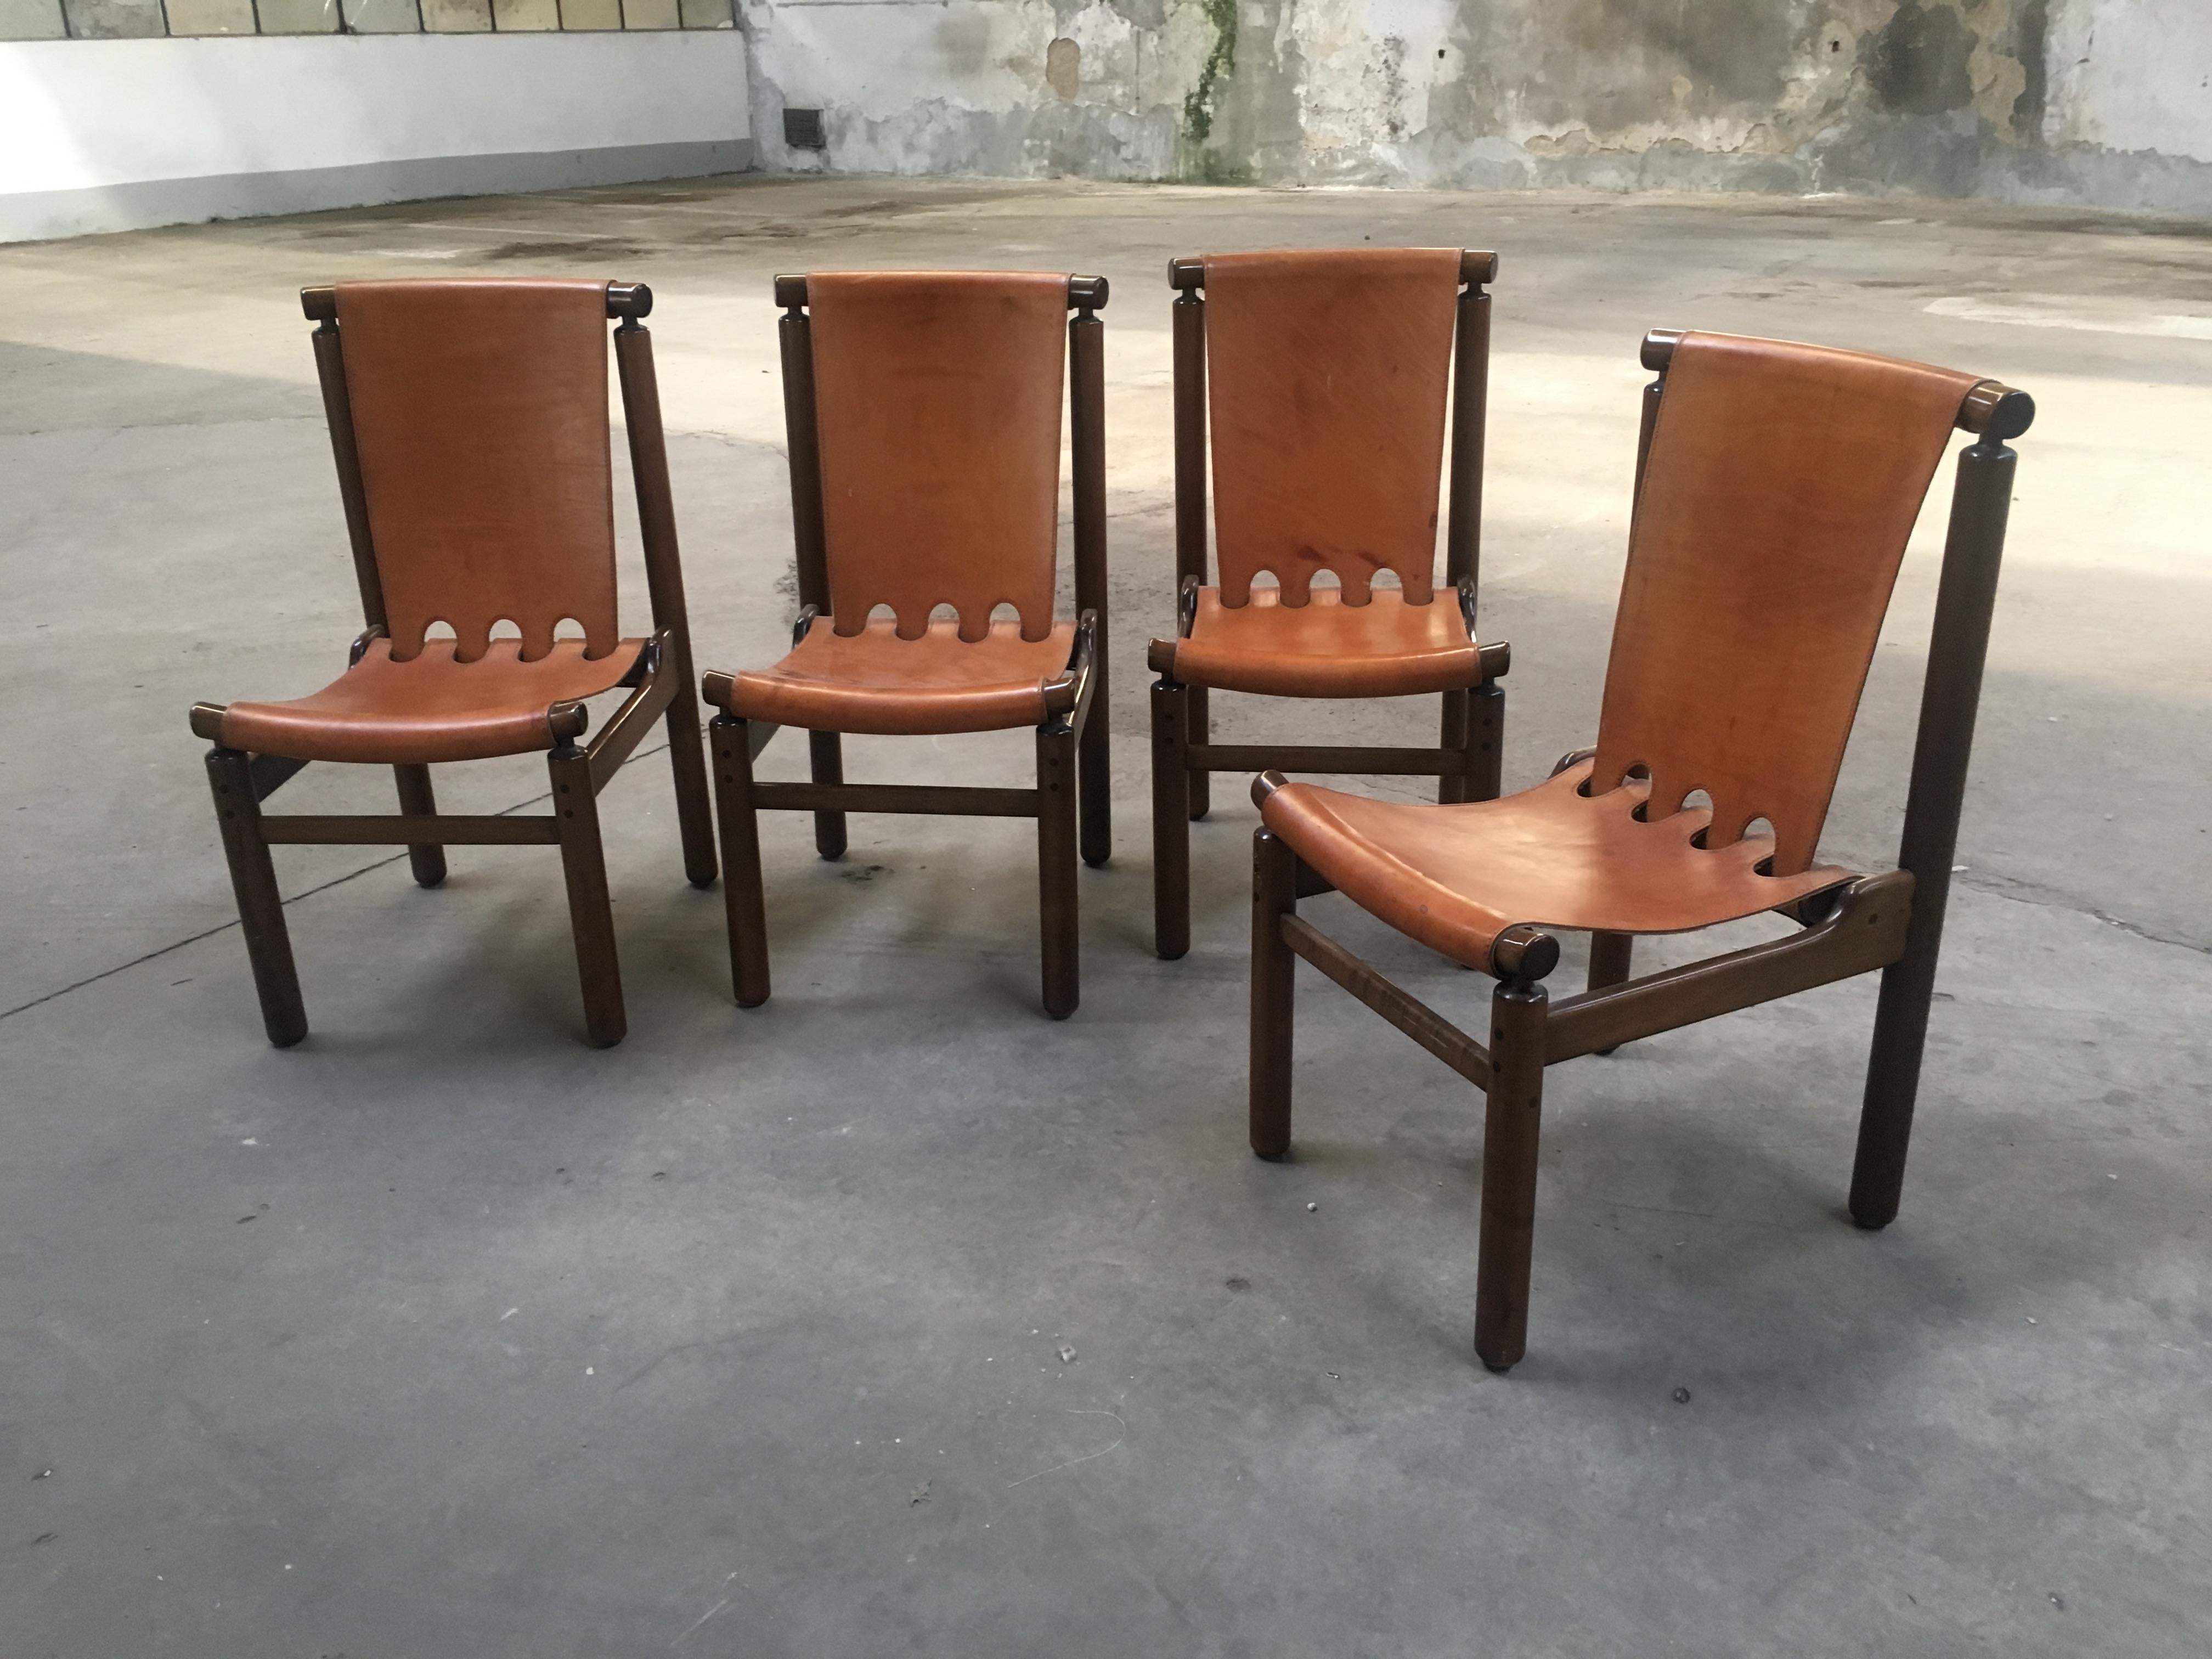 Mid-Century Modern Italian set of 4 cognac leather and dark beech wood dining chairs by Ilmari Tapiovaara for La Permanente Mobili Cantù.
The chairs are in really good vintage conditions.